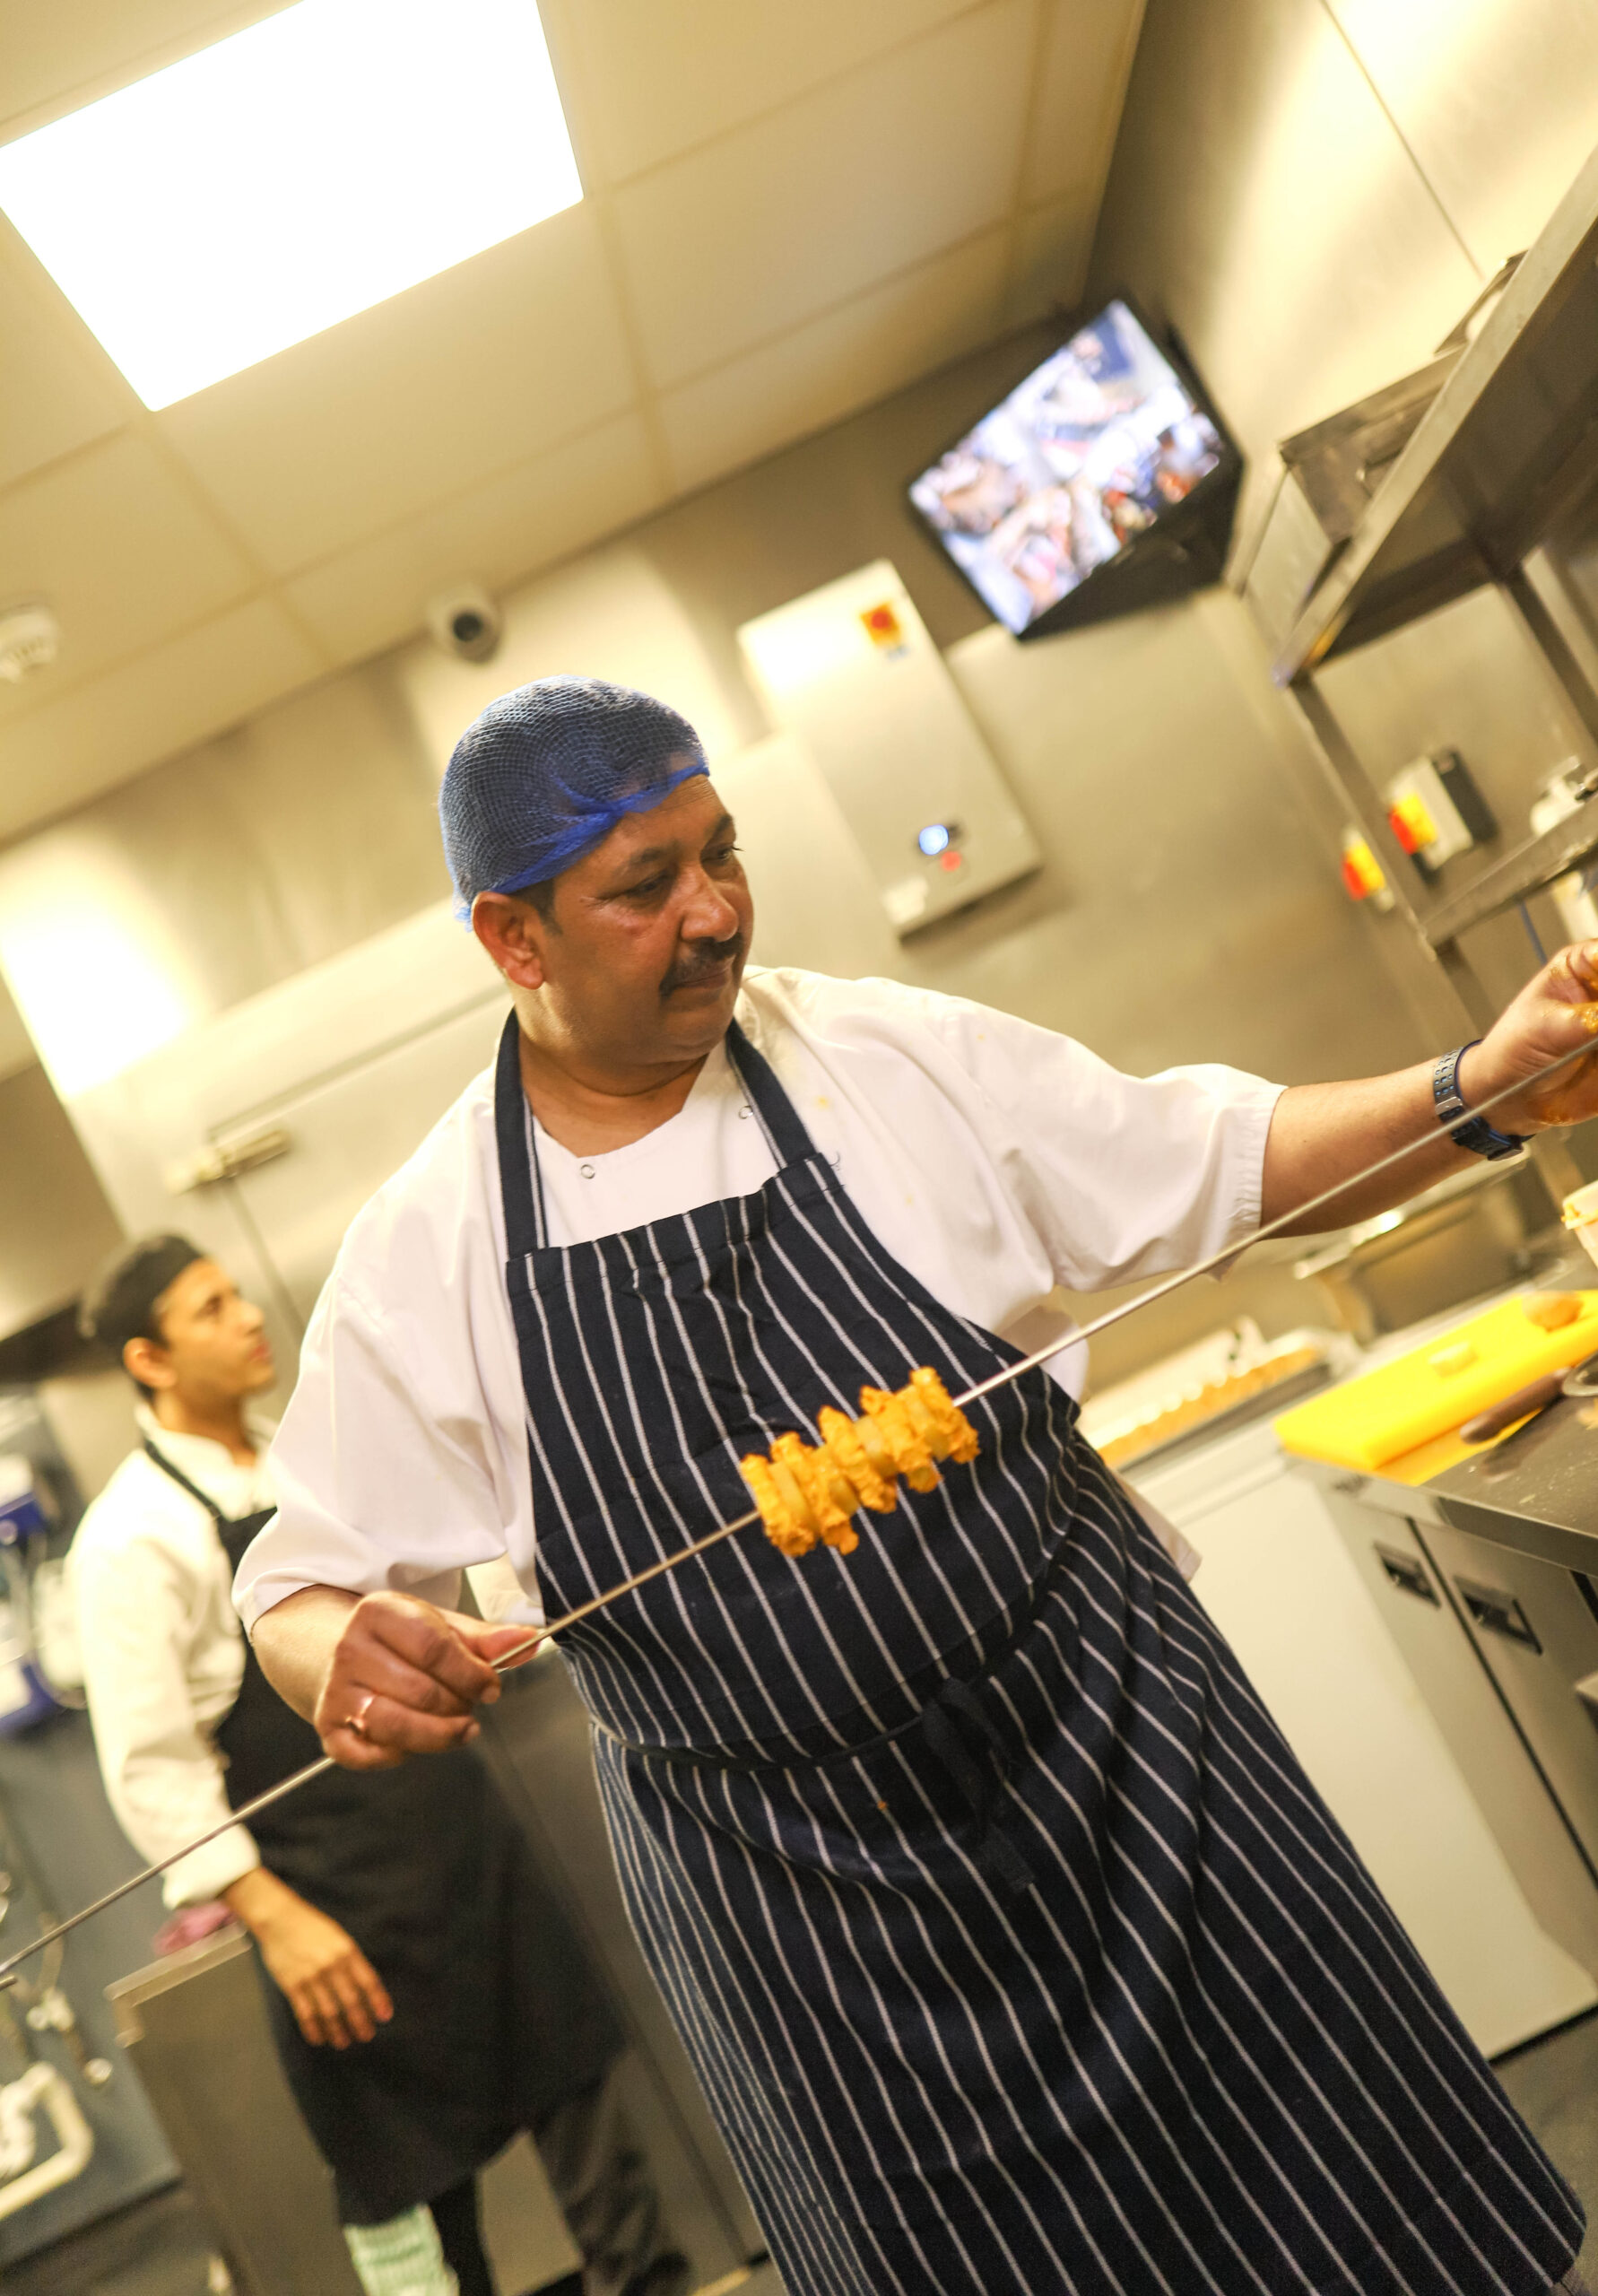 A chef crafting an Indian dish in Orpington